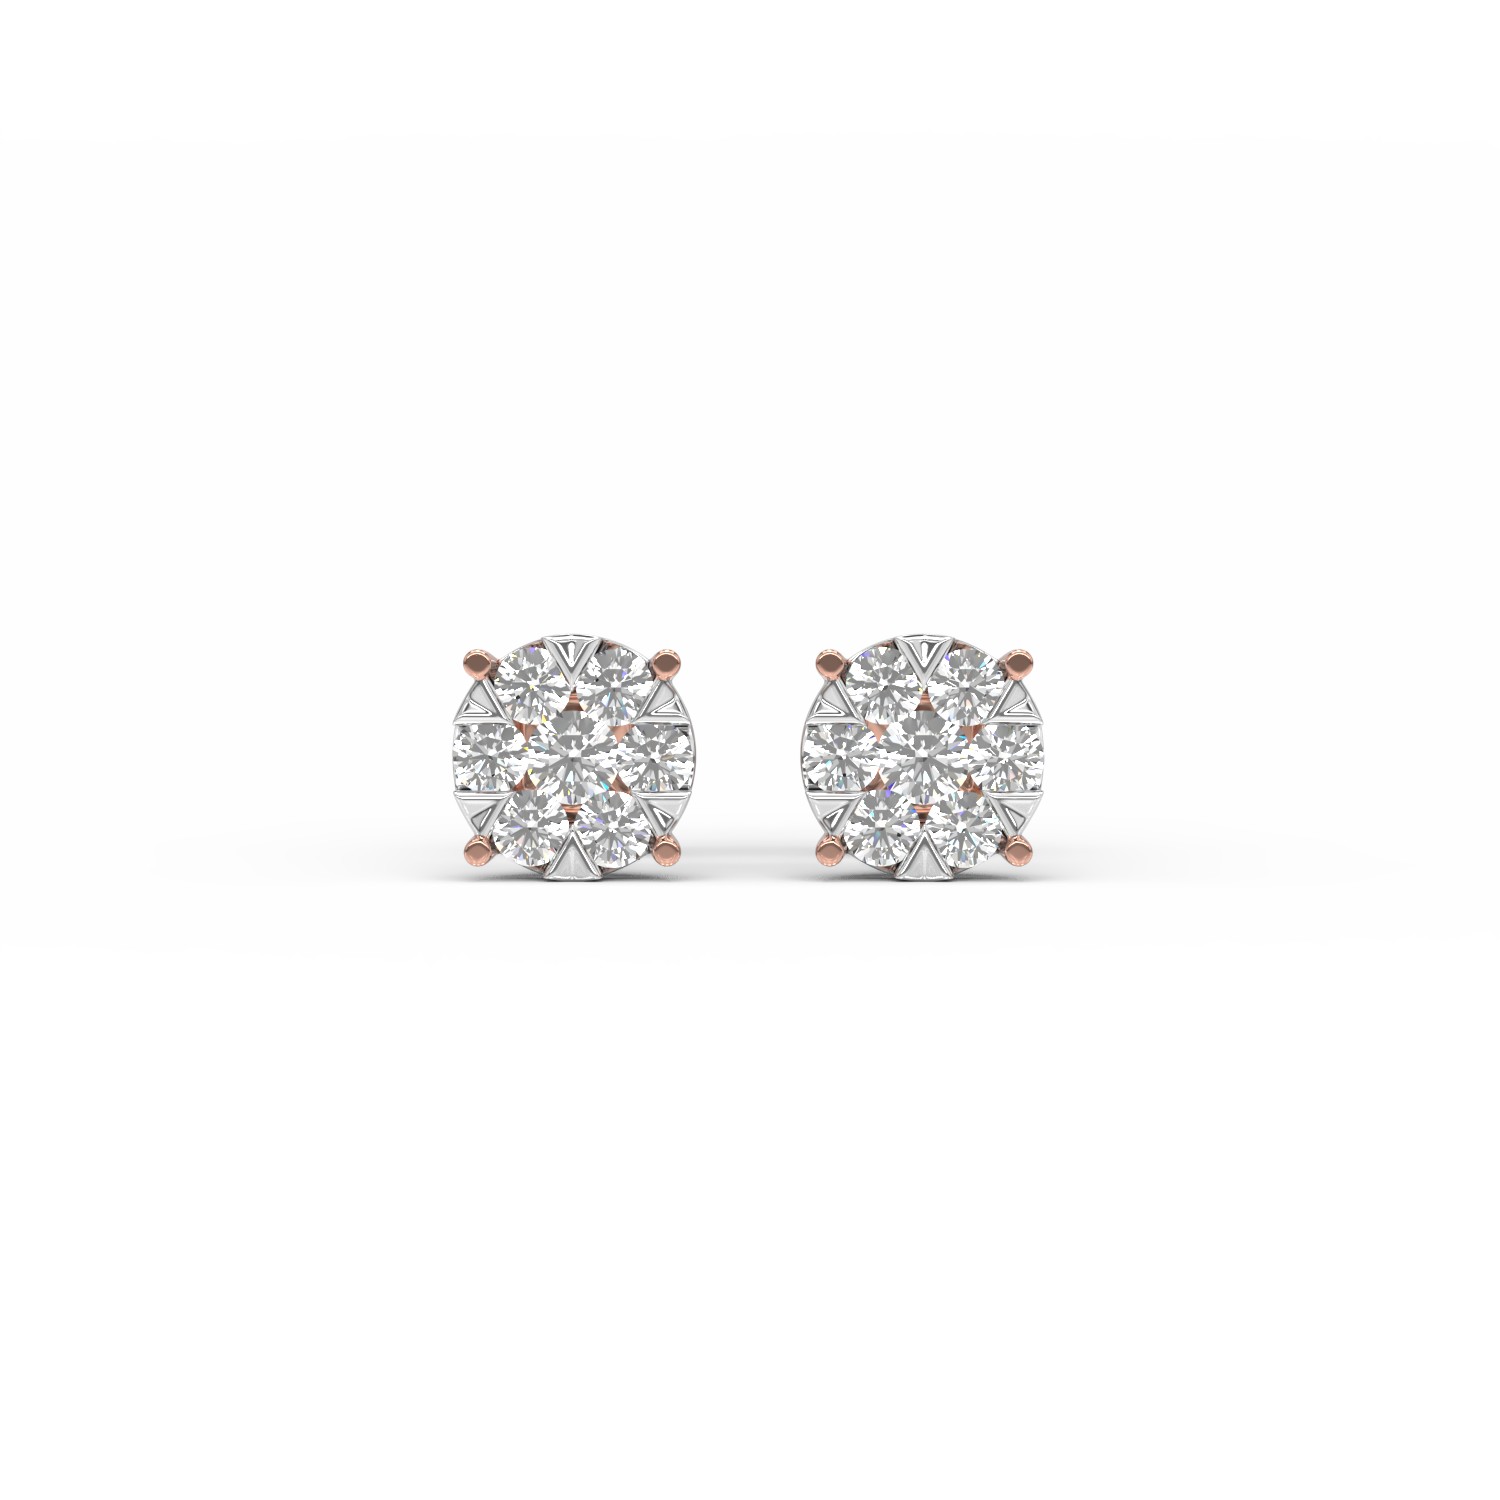 White-rose gold screw back earrings with 0.5ct diamonds